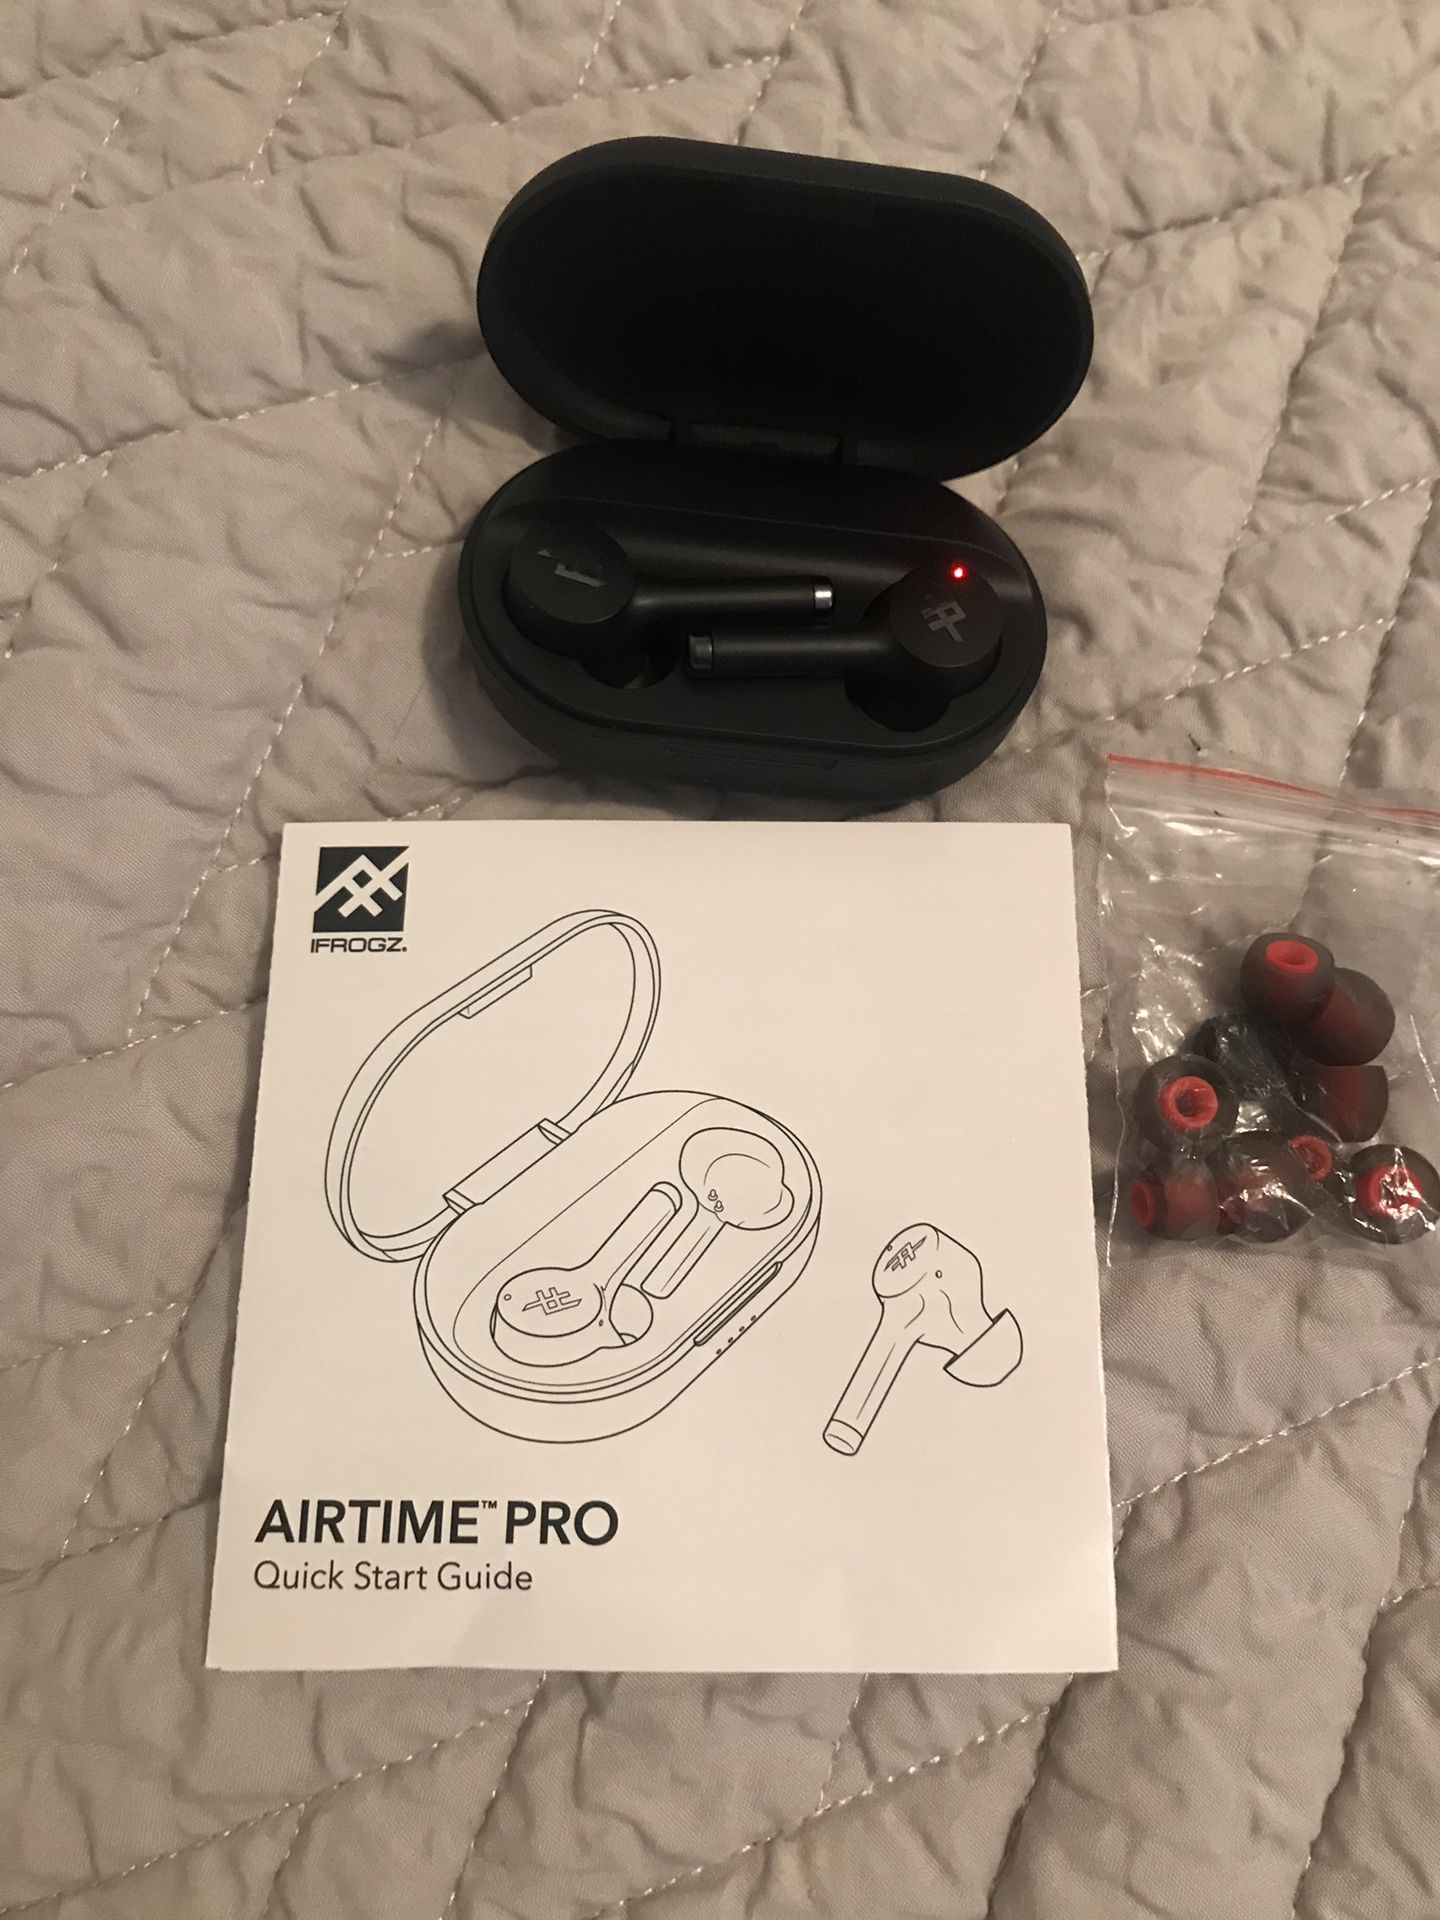 AirTime Pro Wireless Audio Earbuds